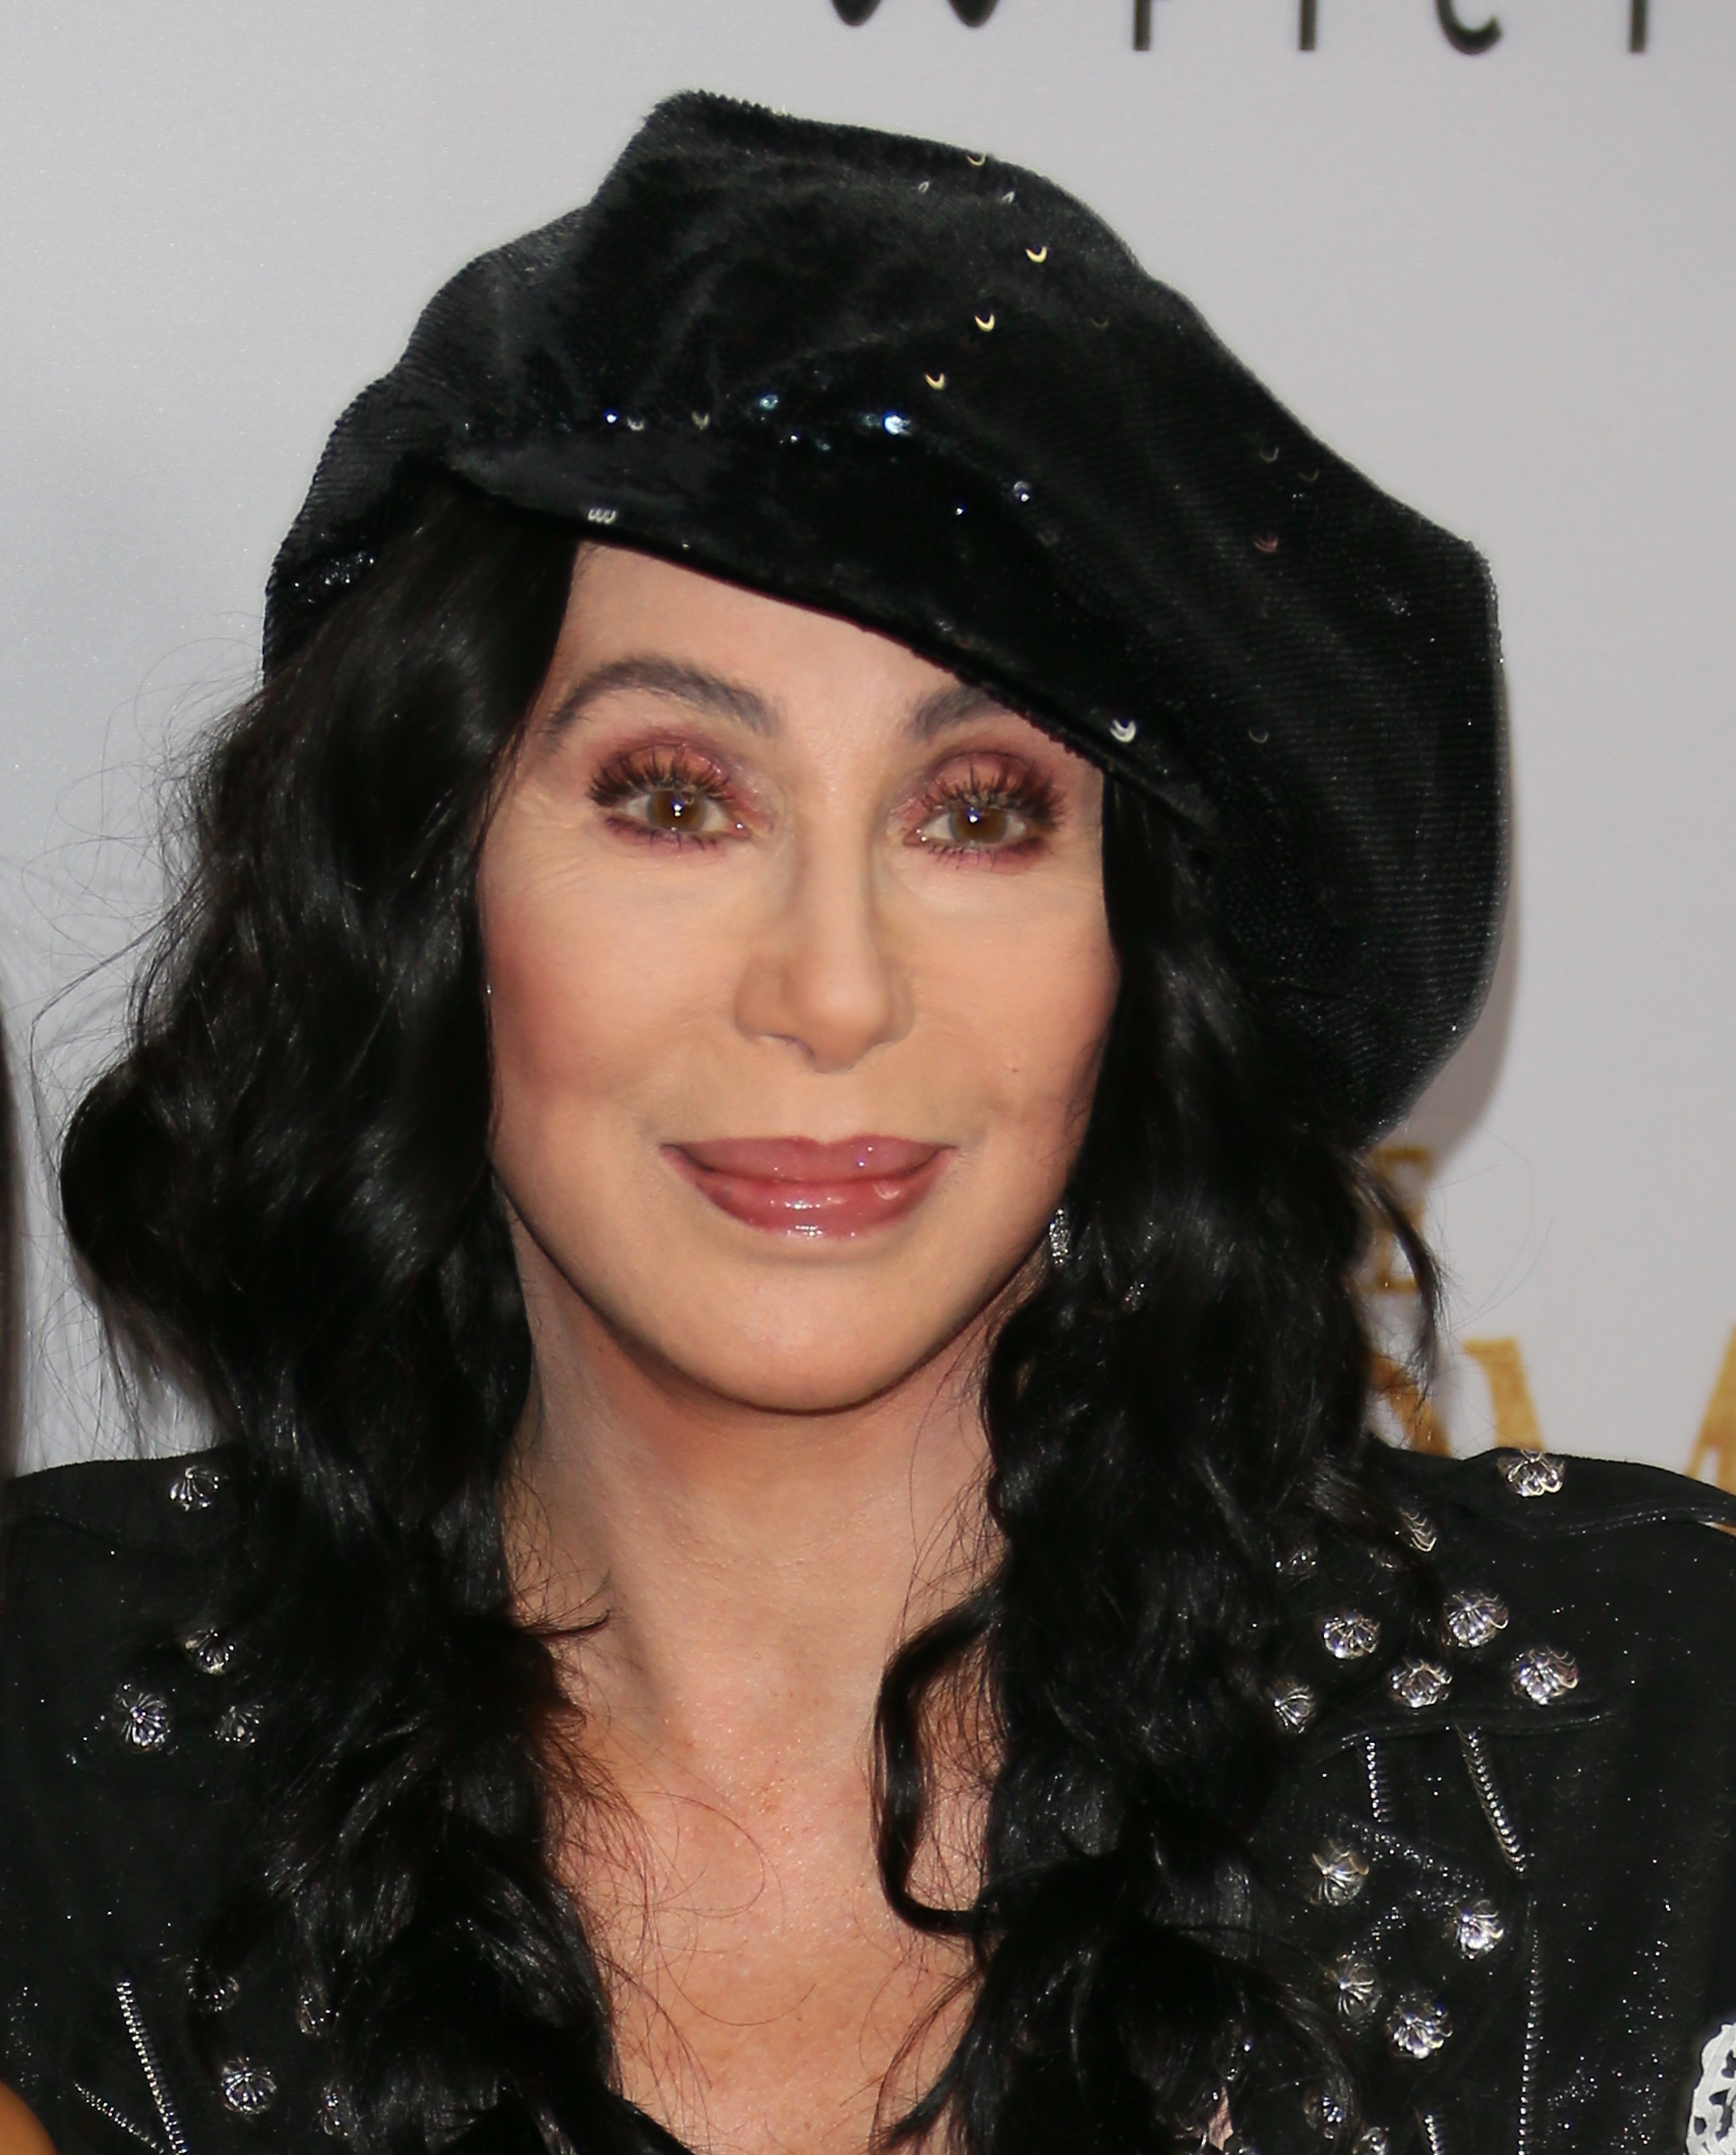 Cher's Plastic Surgery: See Her Transformation Over the Years